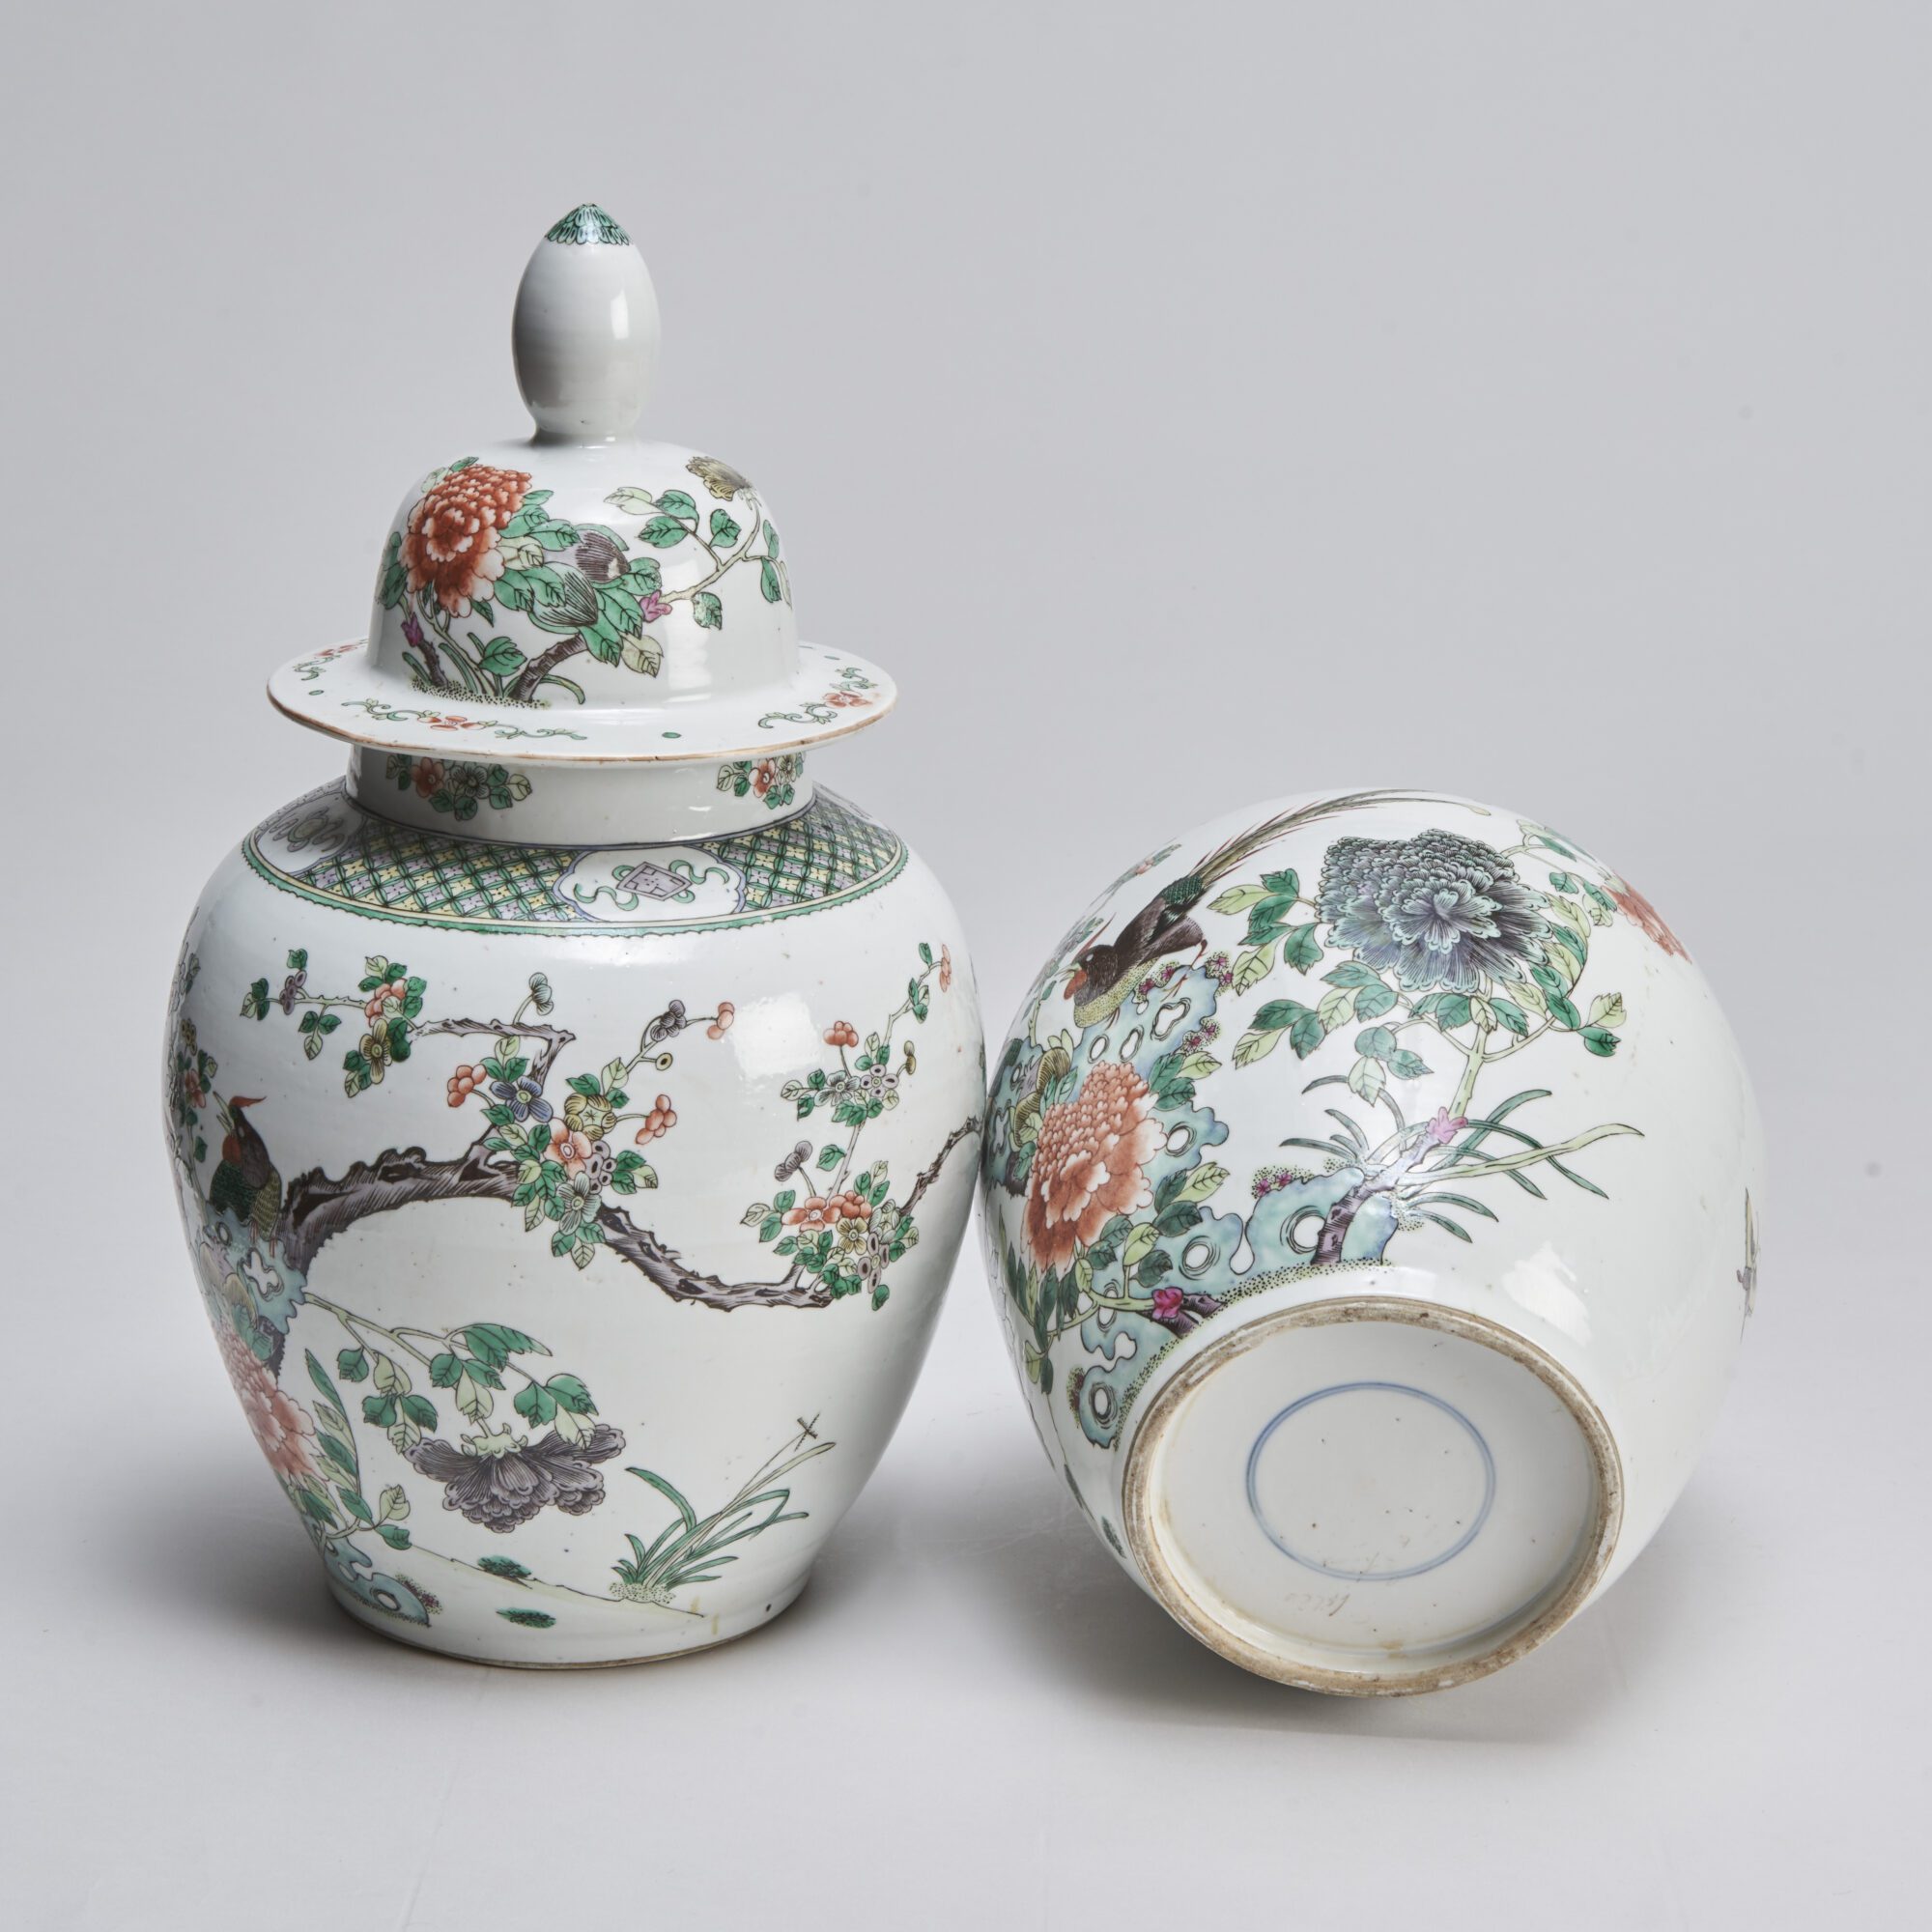 An unusual pair of Chinese porcelain jars and covers at Kevin Page